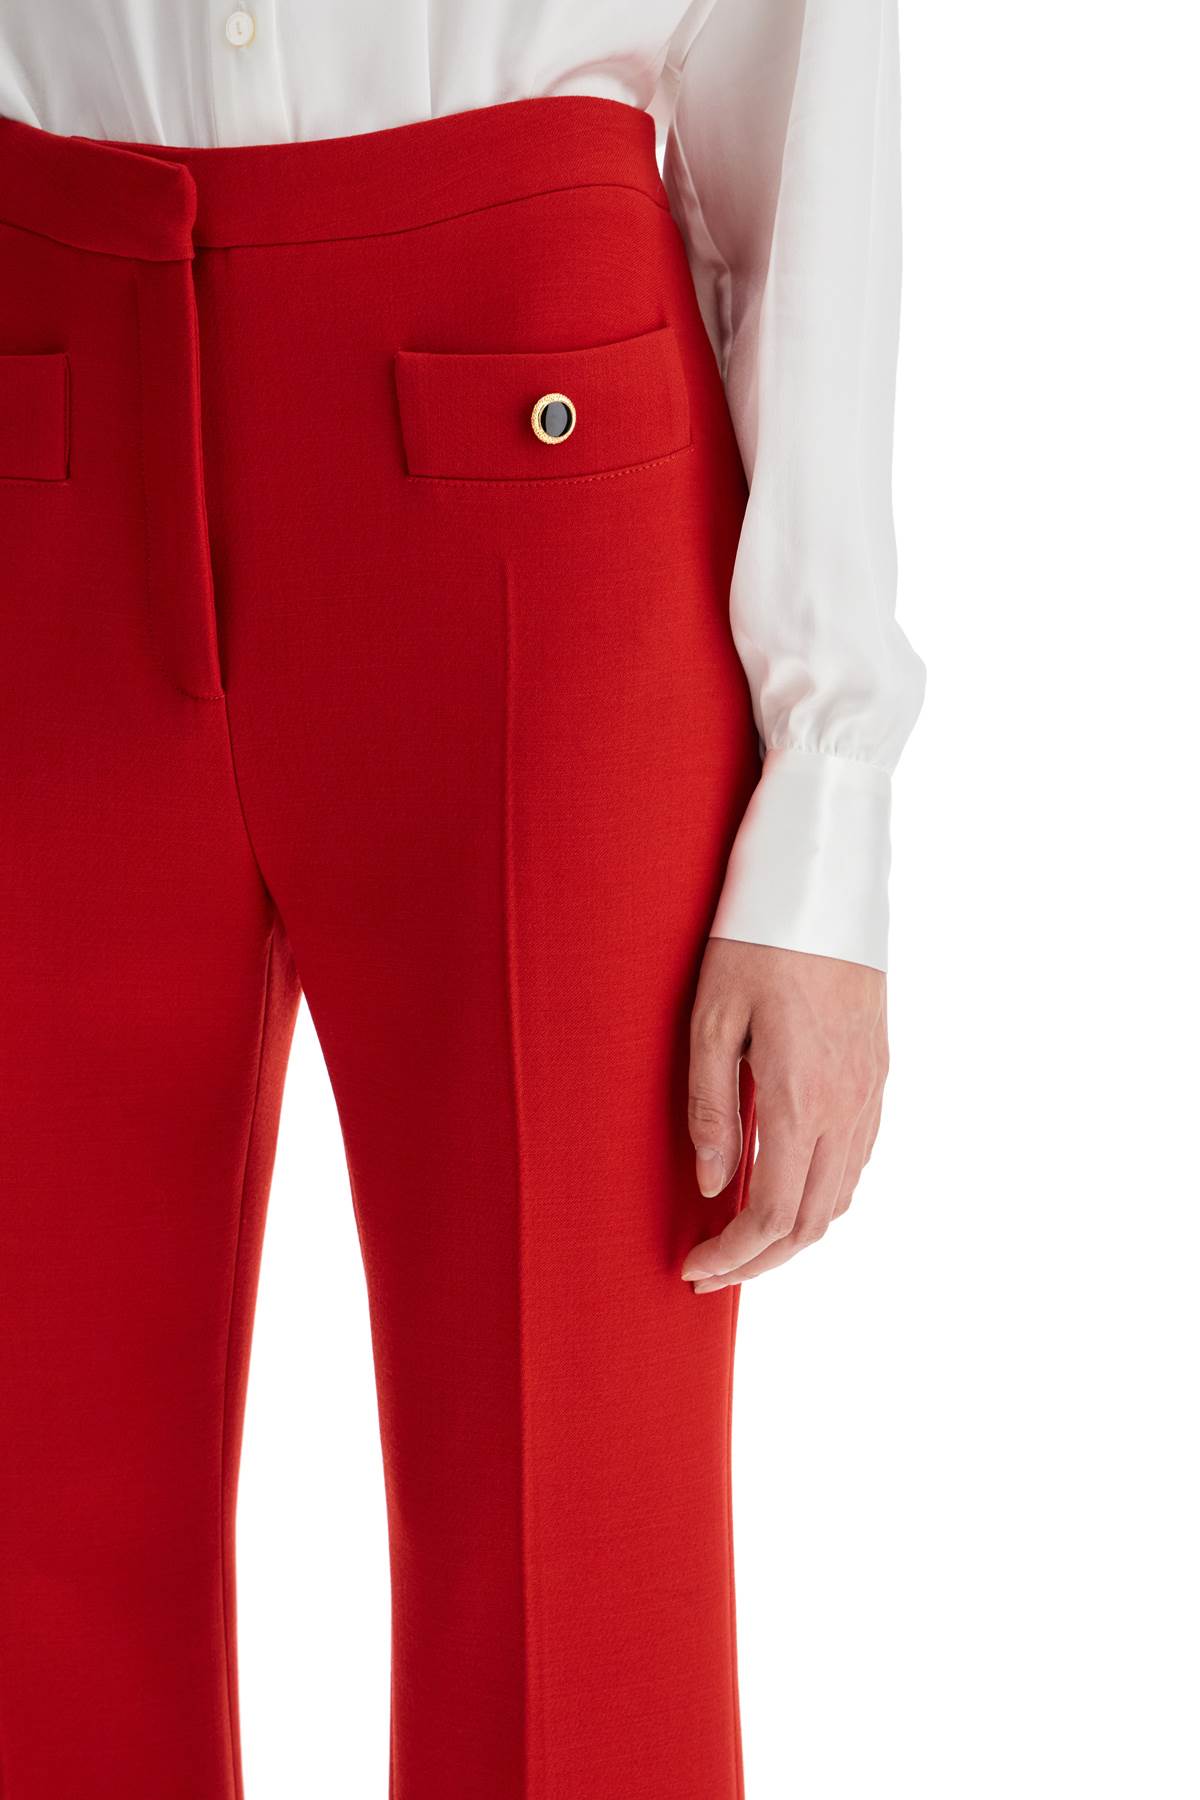 Alessandra Rich Tailored Wool Bootcut Trousers For